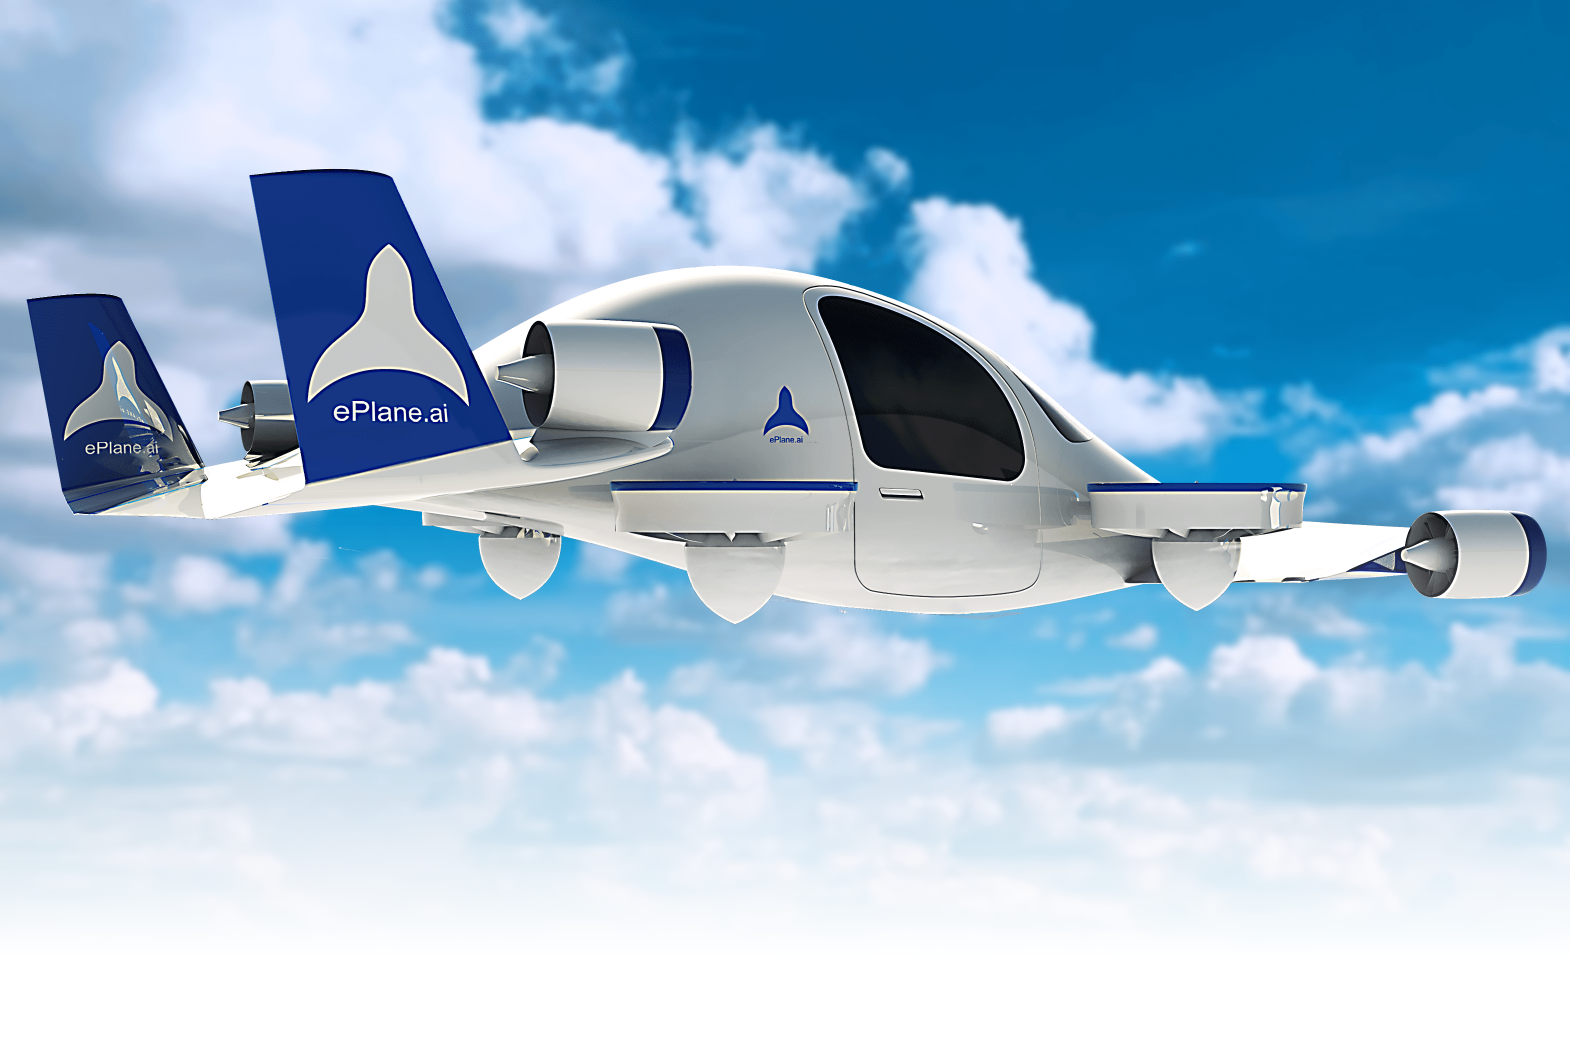 The founder of ePlane said that the company plans to release the first prototype of the air taxi by the end of 2024, and launch full-scale commercialisation in India in 2027